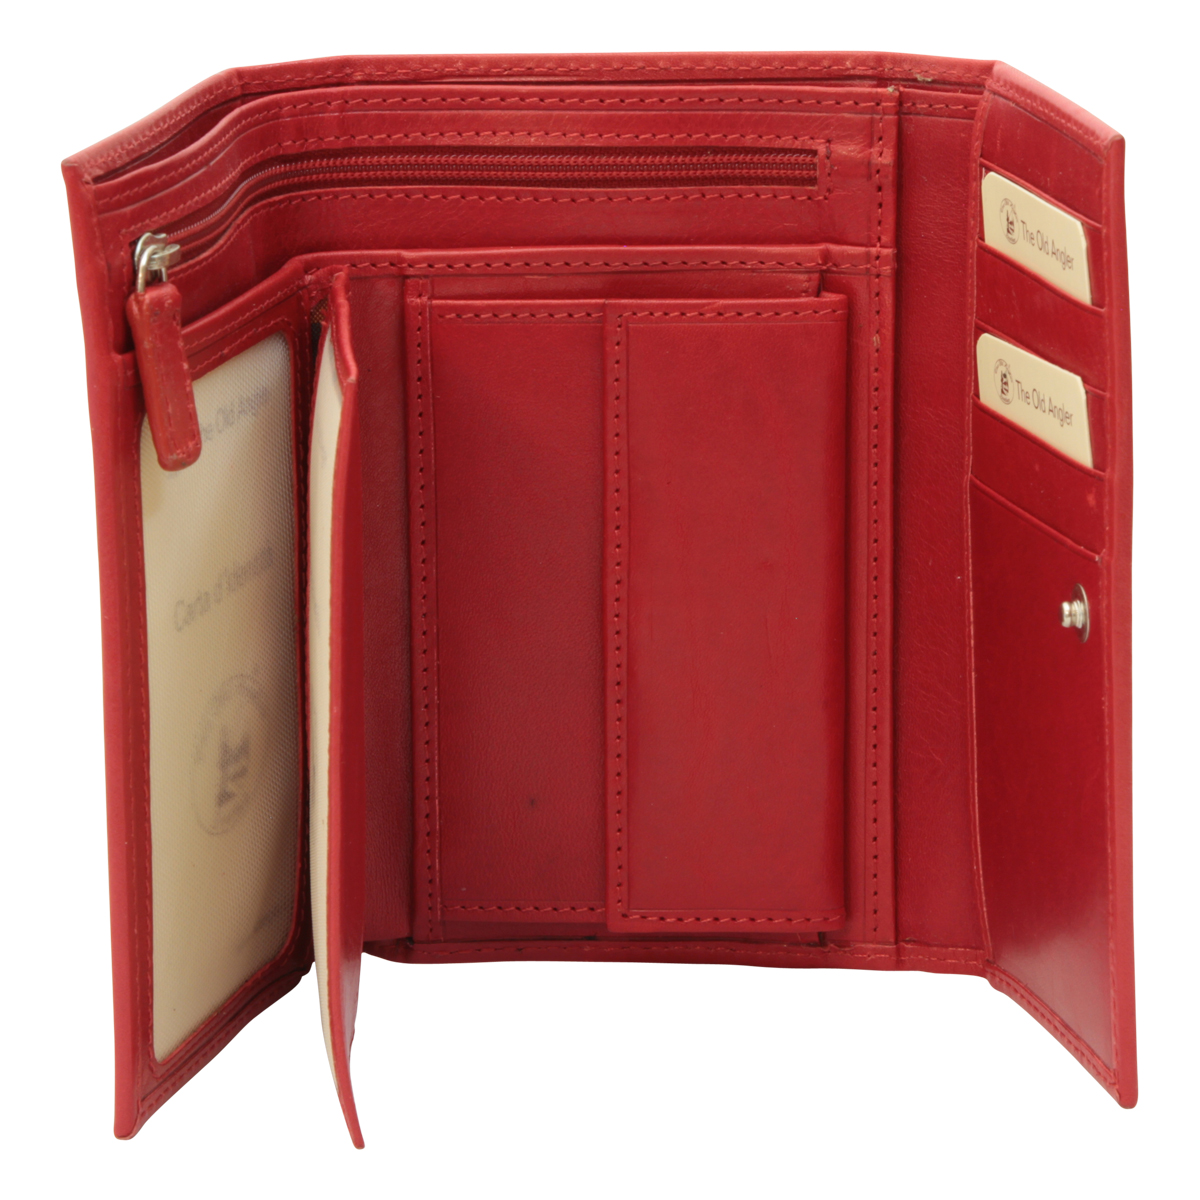 Leather wallet for women - red|501789RO|Old Angler Firenze